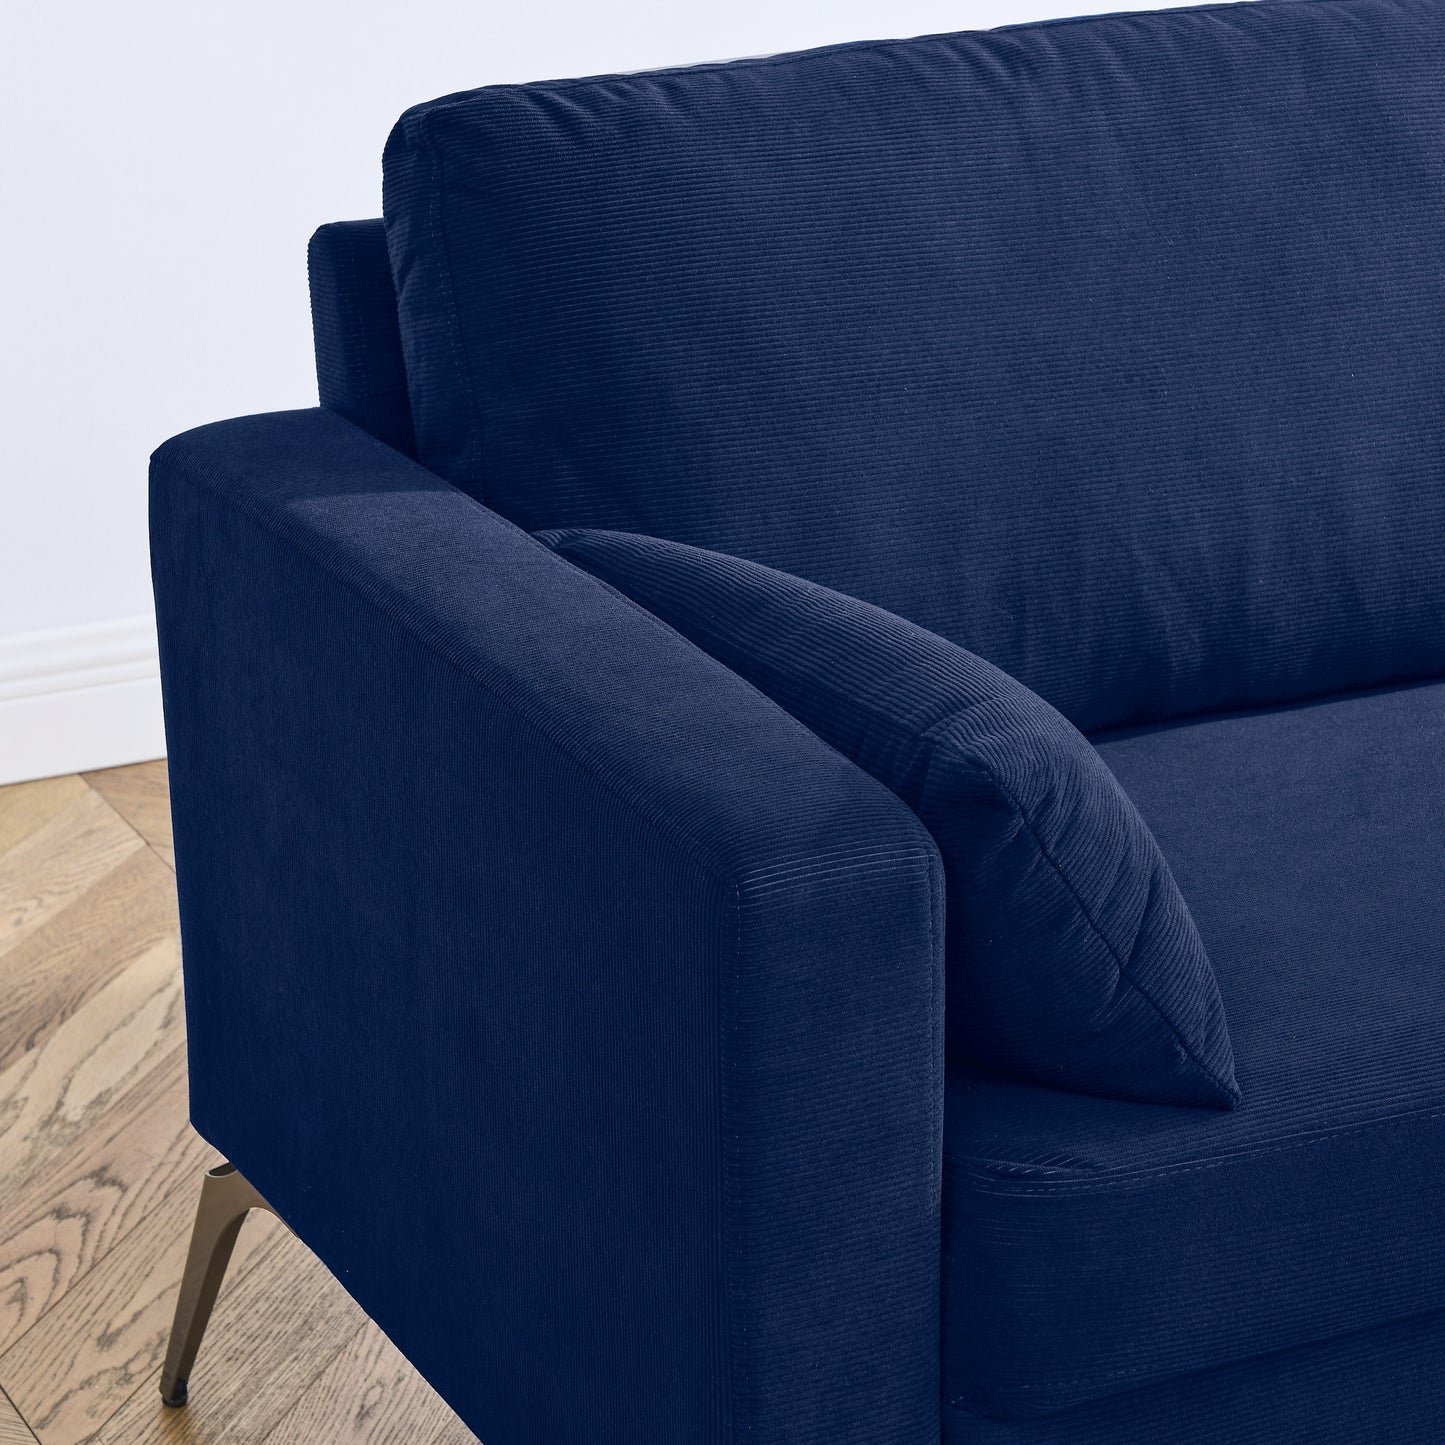 Loveseat Living Room Sofa,with Square Arms and Tight Back, with Two Small Pillows,Corduroy Navy